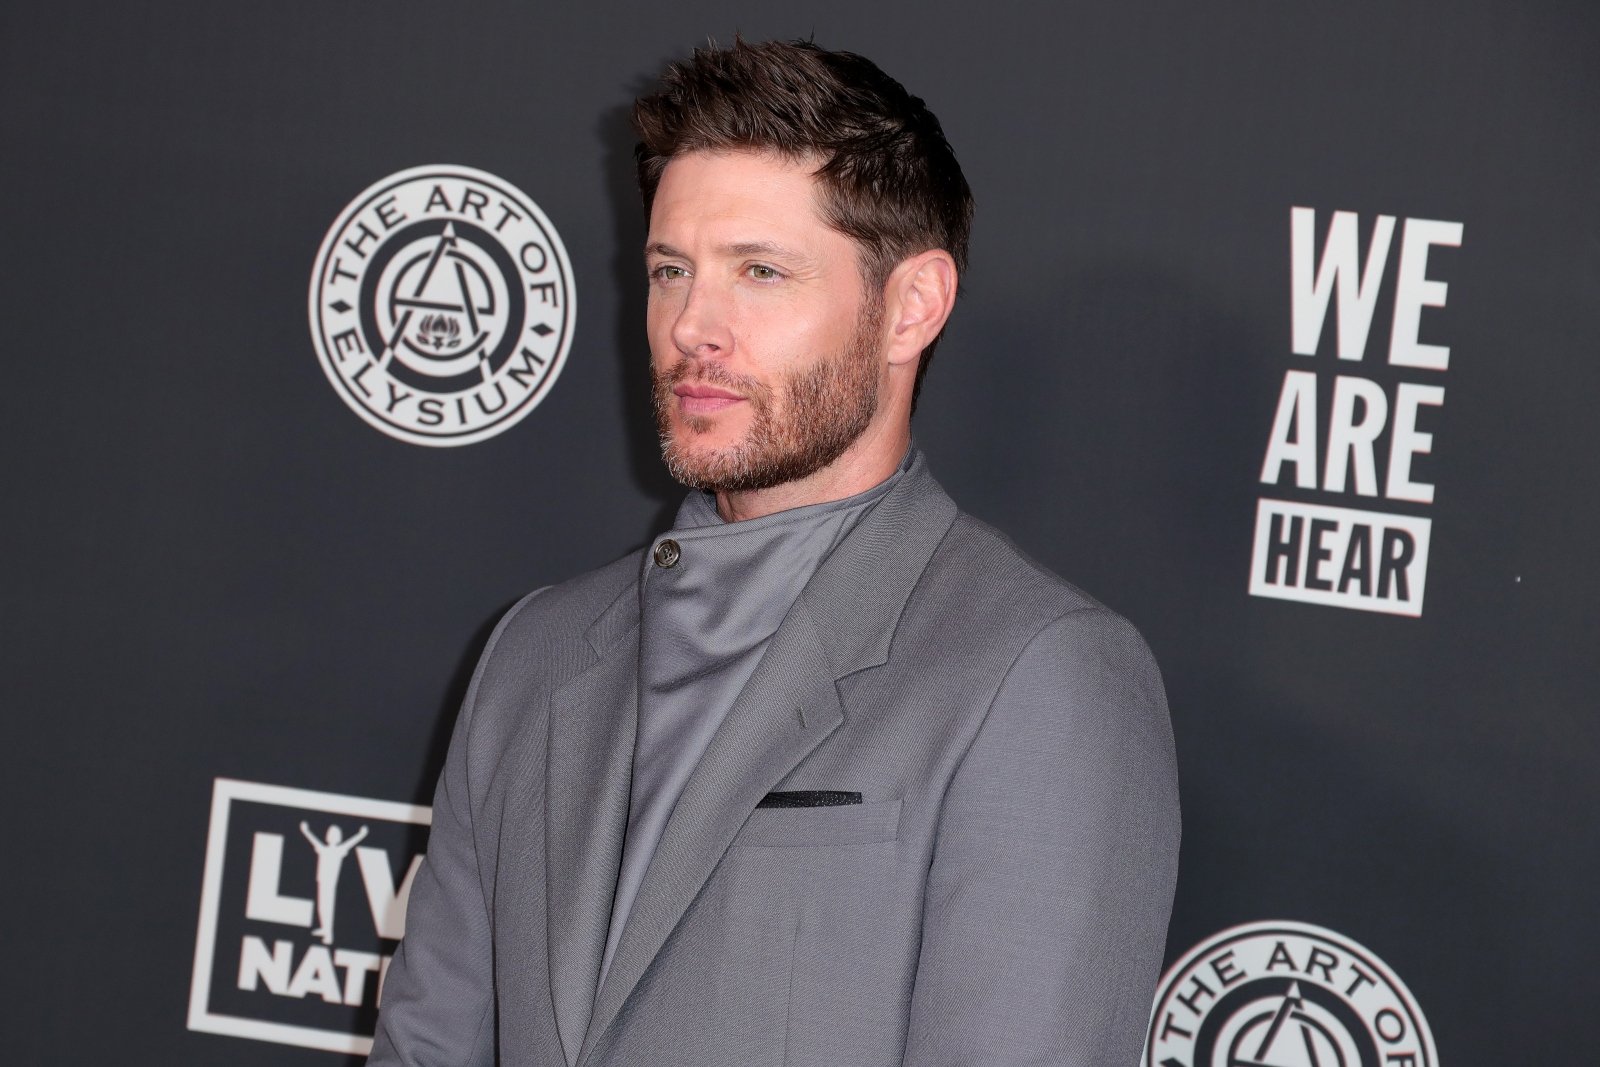 Jensen Ackles attends The Art Of Elysium's 13th Annual Celebration, 2020